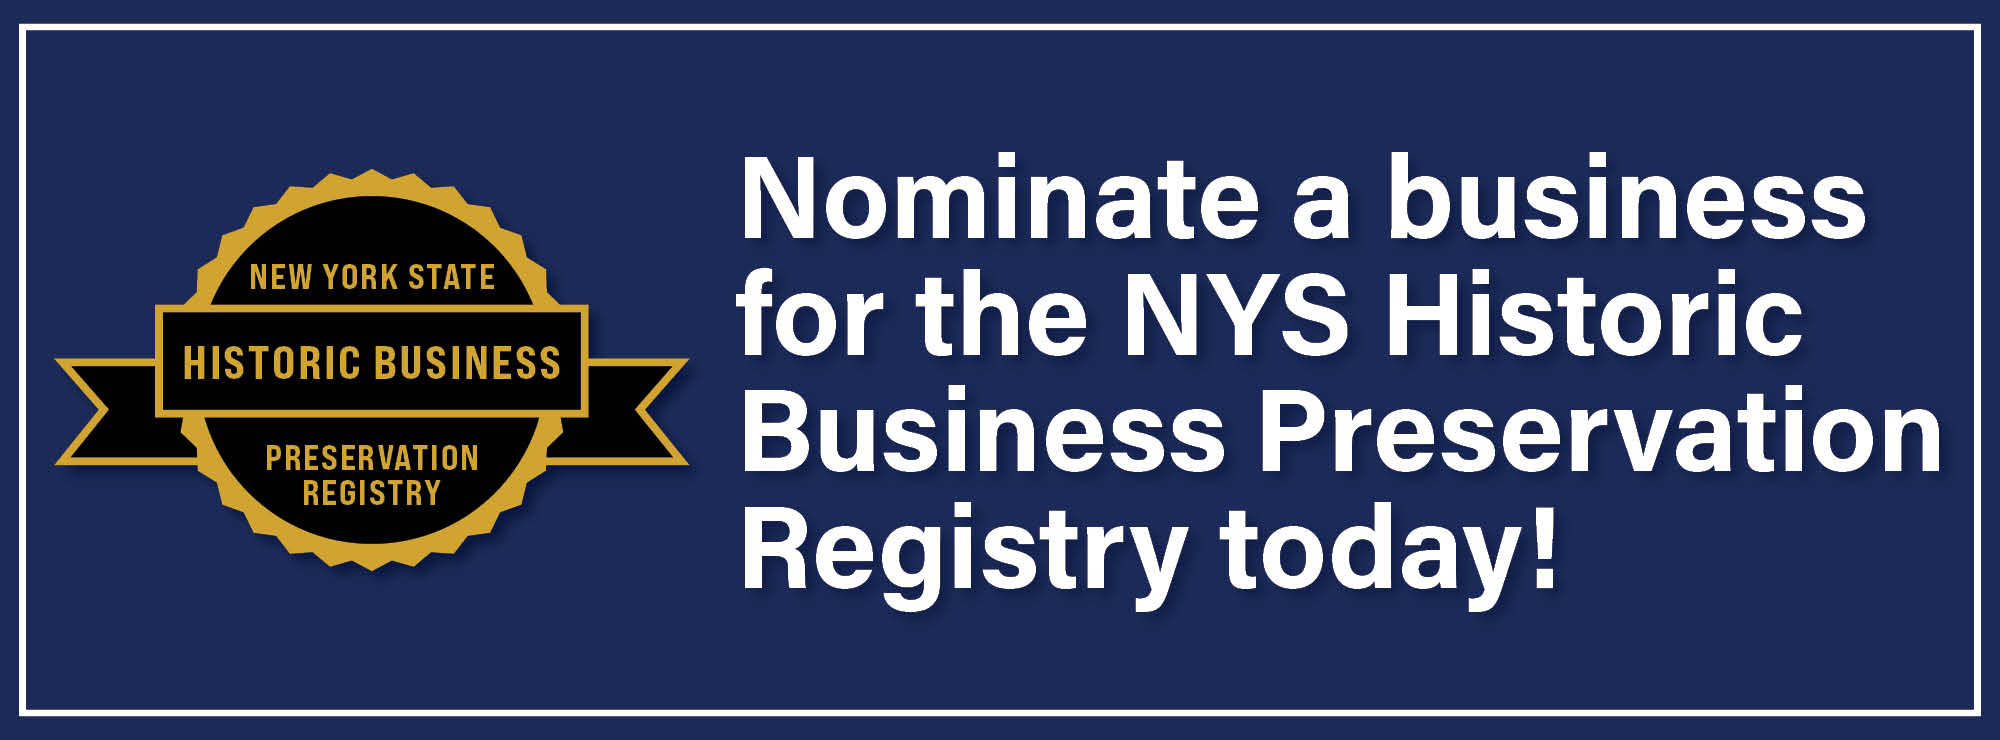 Nominate a business for the NYS Historic Business Preservation Registry!